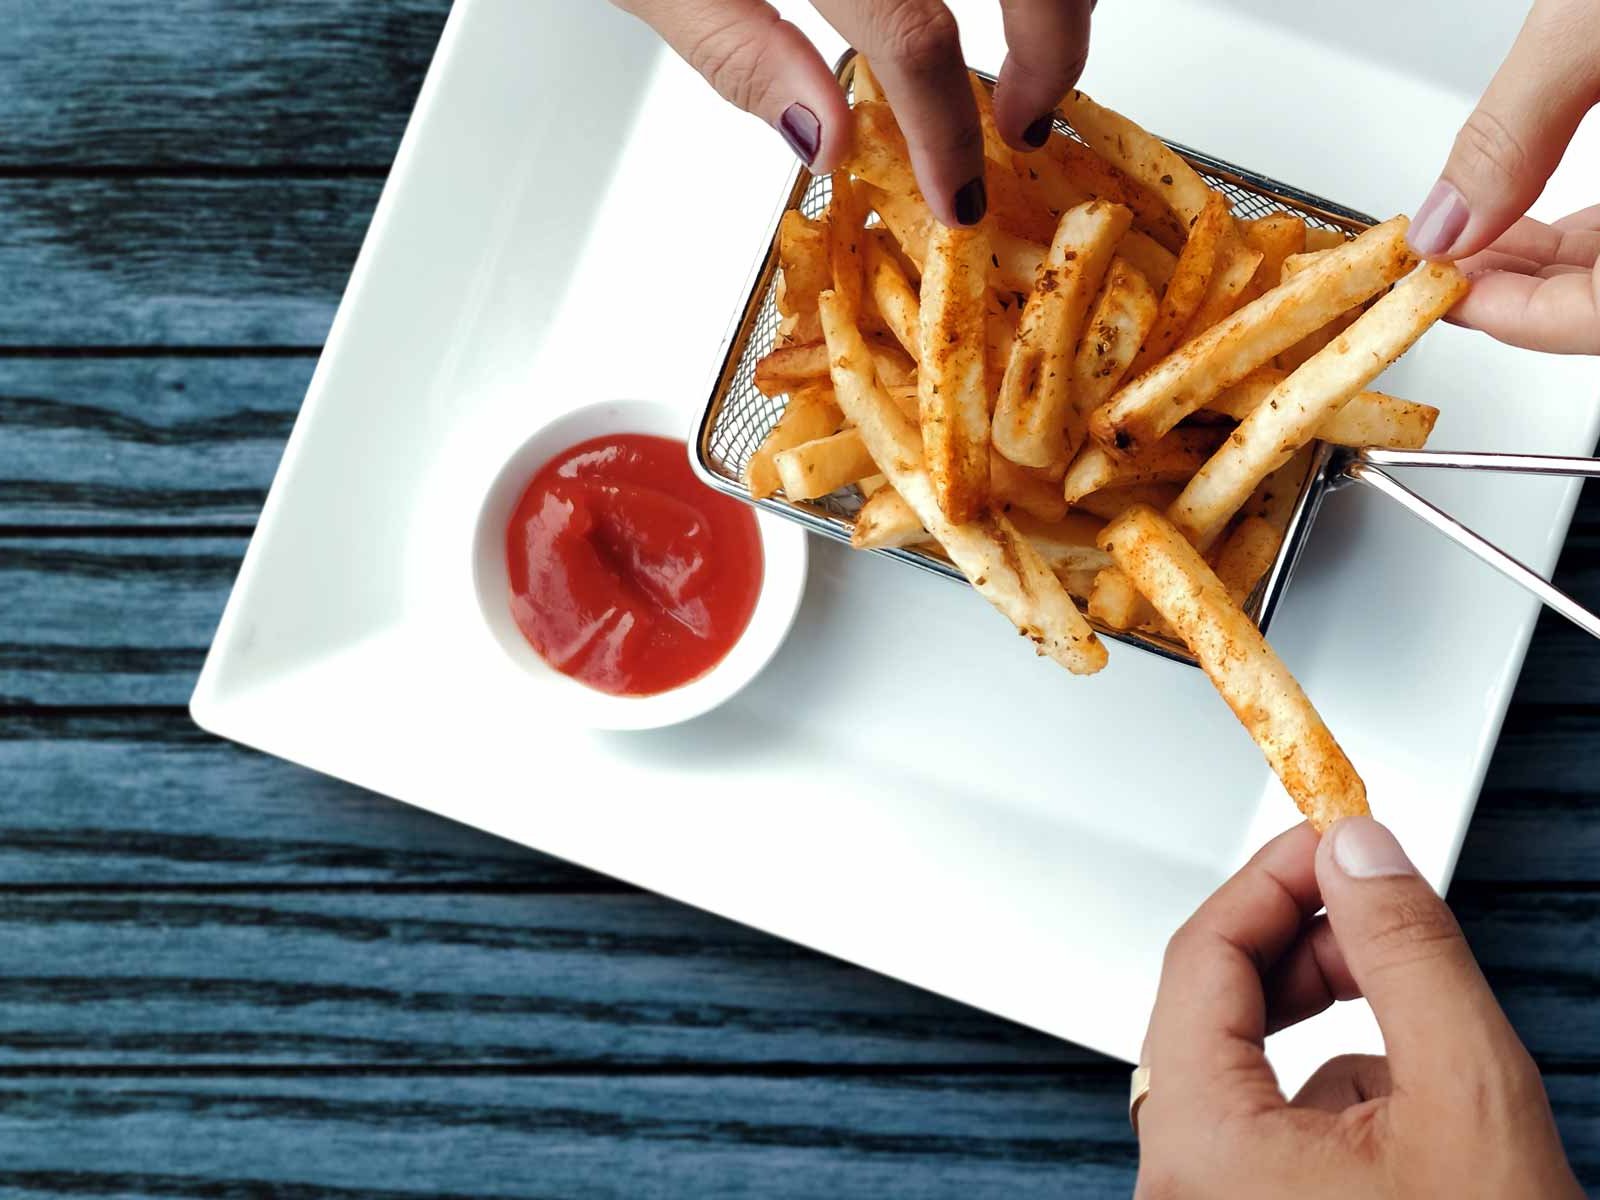 The perfect fries are crispy on the outside, golden brown and soft on the inside.